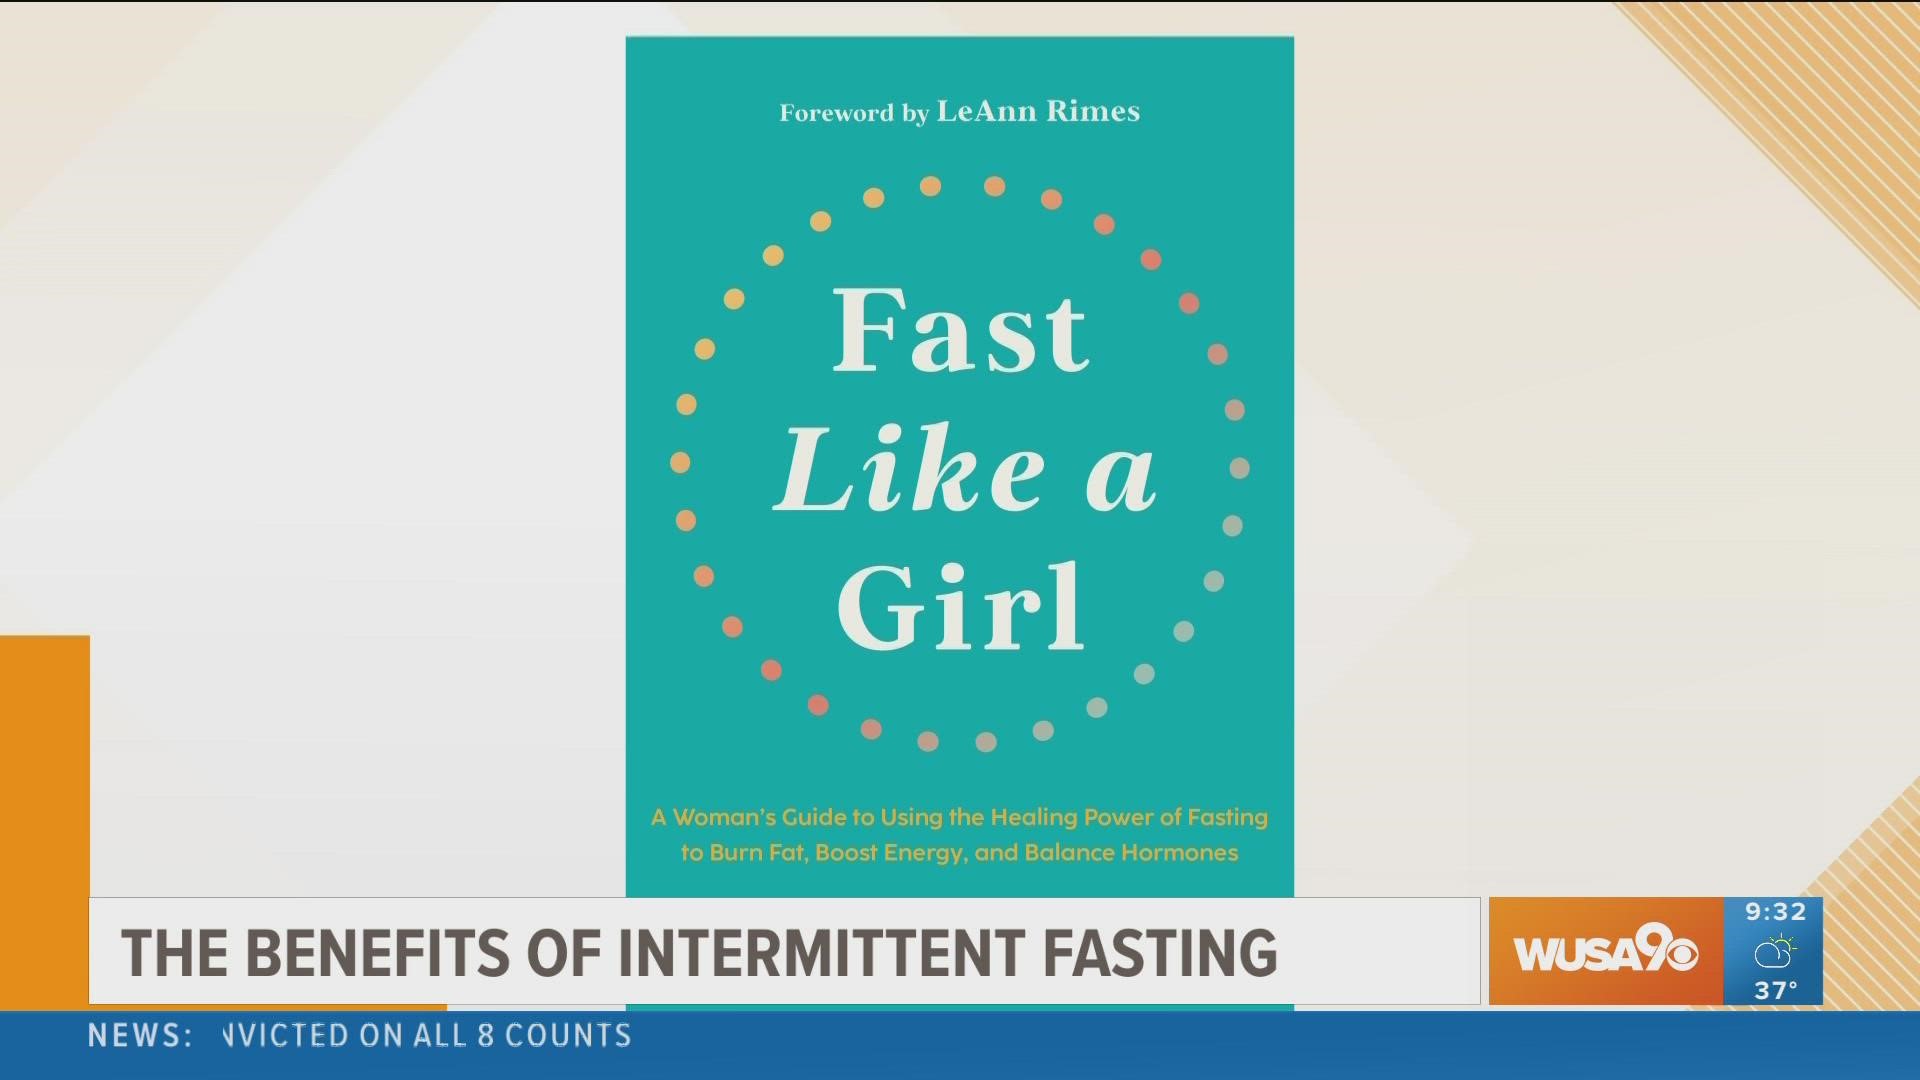 Dr. Mindy Pelz explains how intermittent fasting benefits women's health. Her book 'Fast Like A Girl' is available on Amazon.